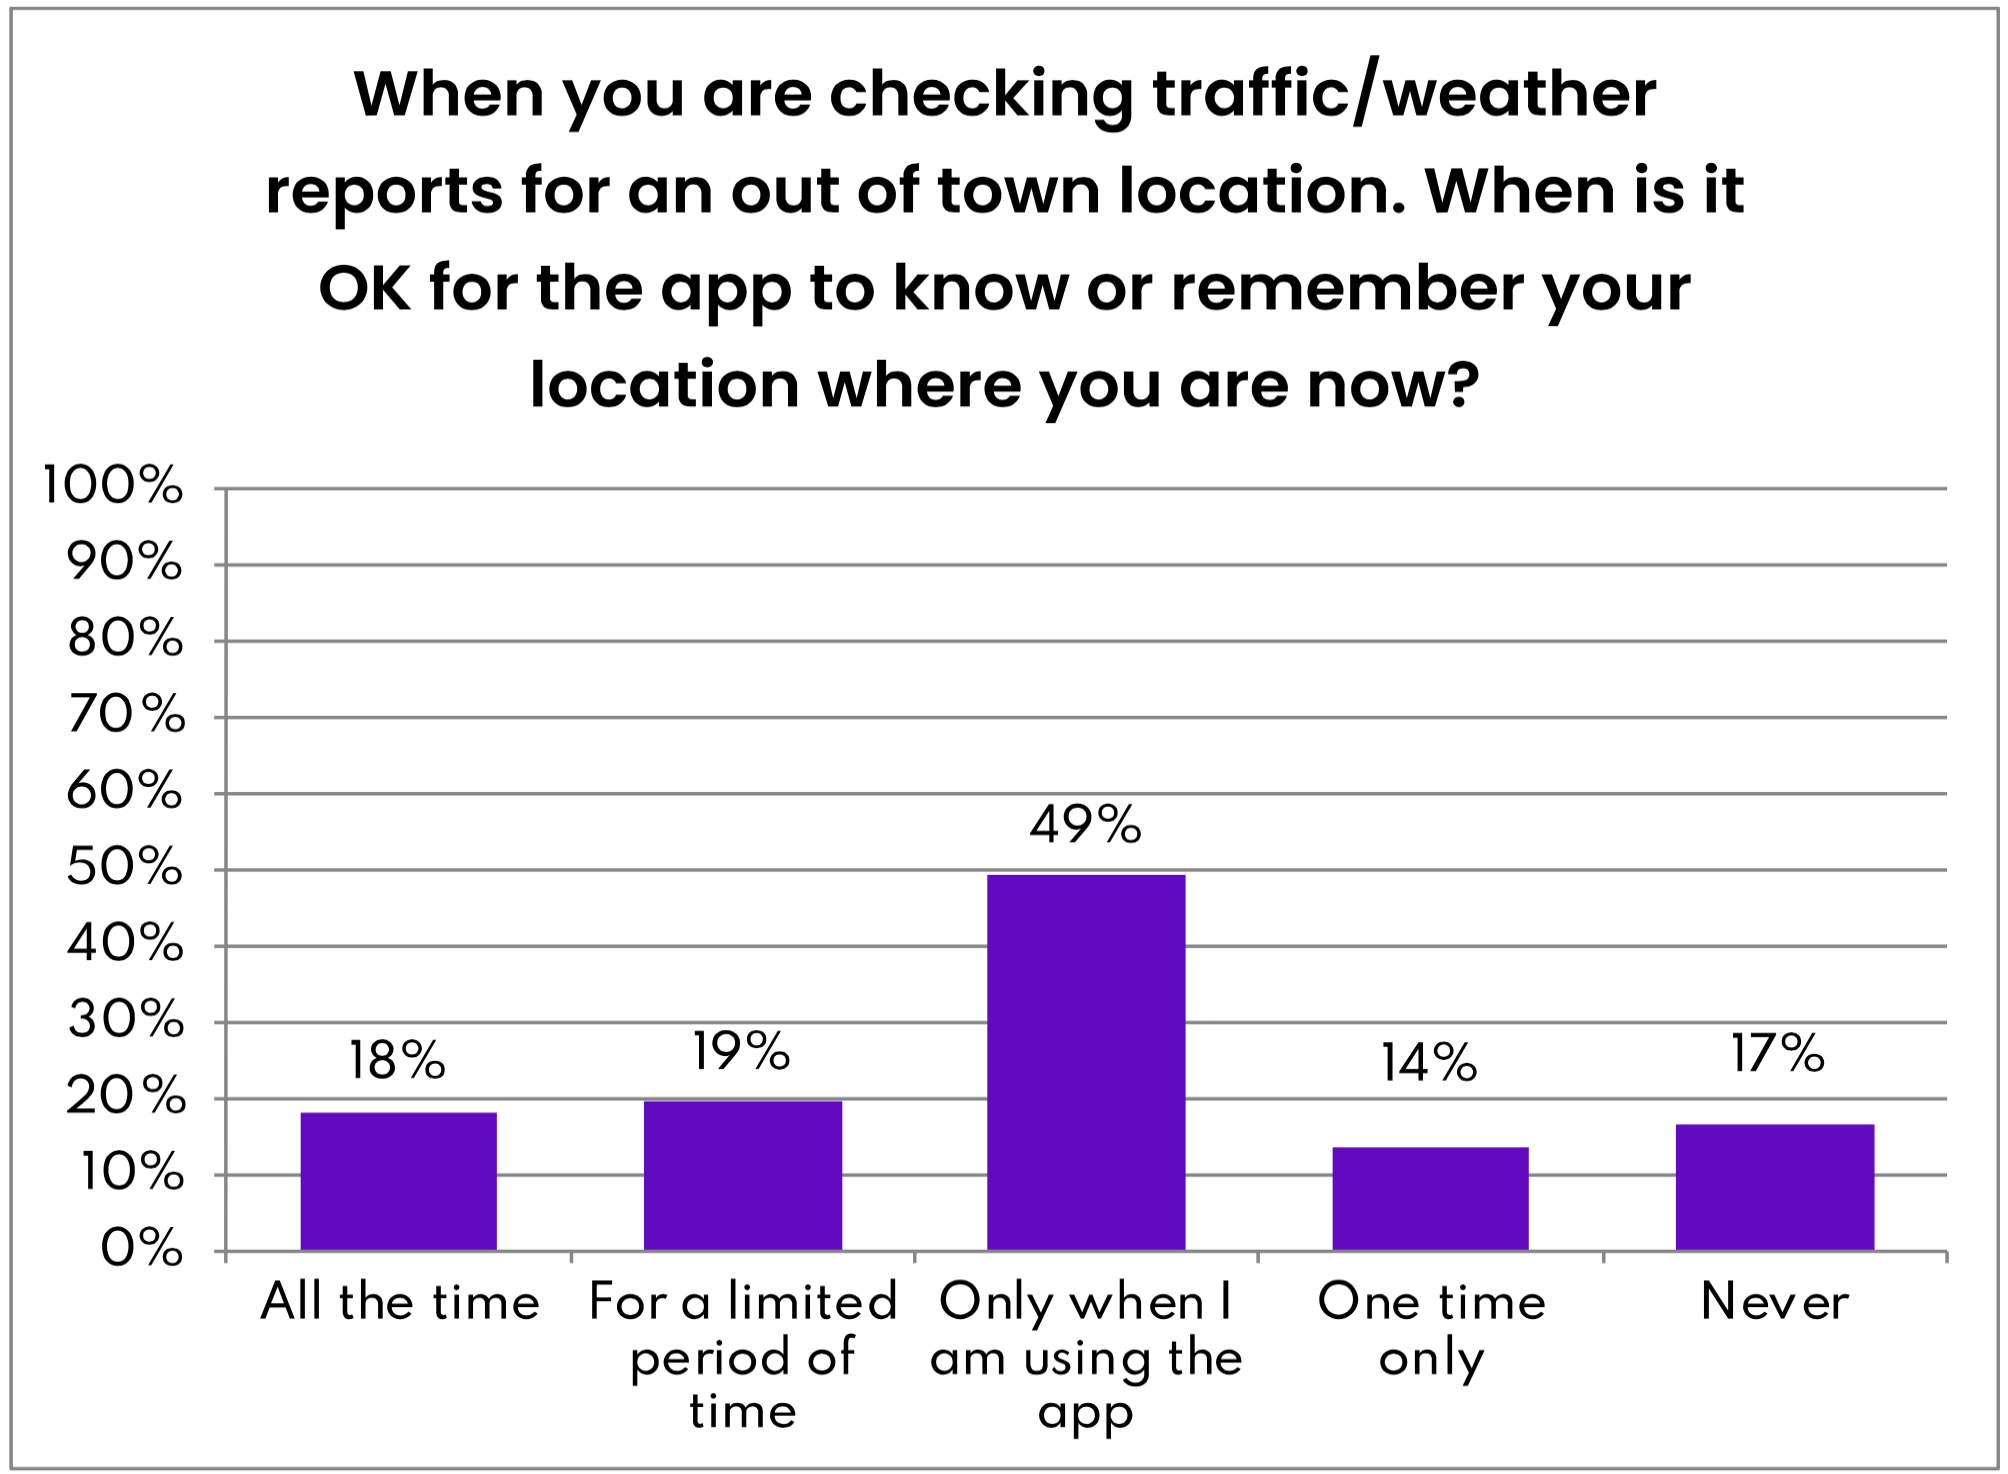 Figure 24- "OK to Remember Location?" Traffic/Weather